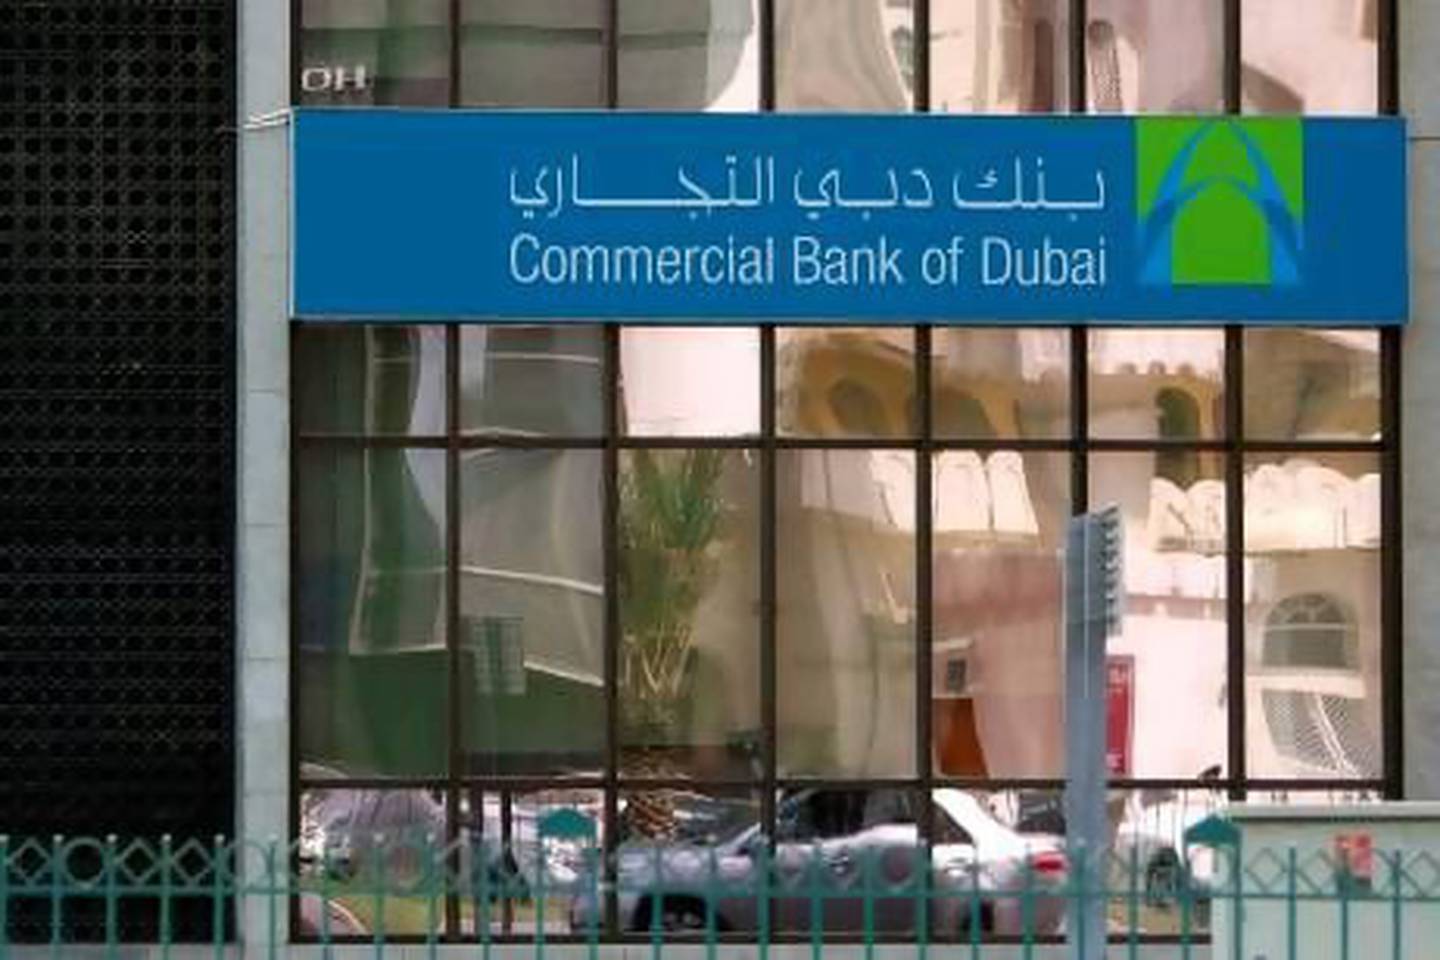 Commercial Bank of Dubai is giving some lucky customers a chance to fly to Qatar for the World Cup. Sammy Dallal / The National